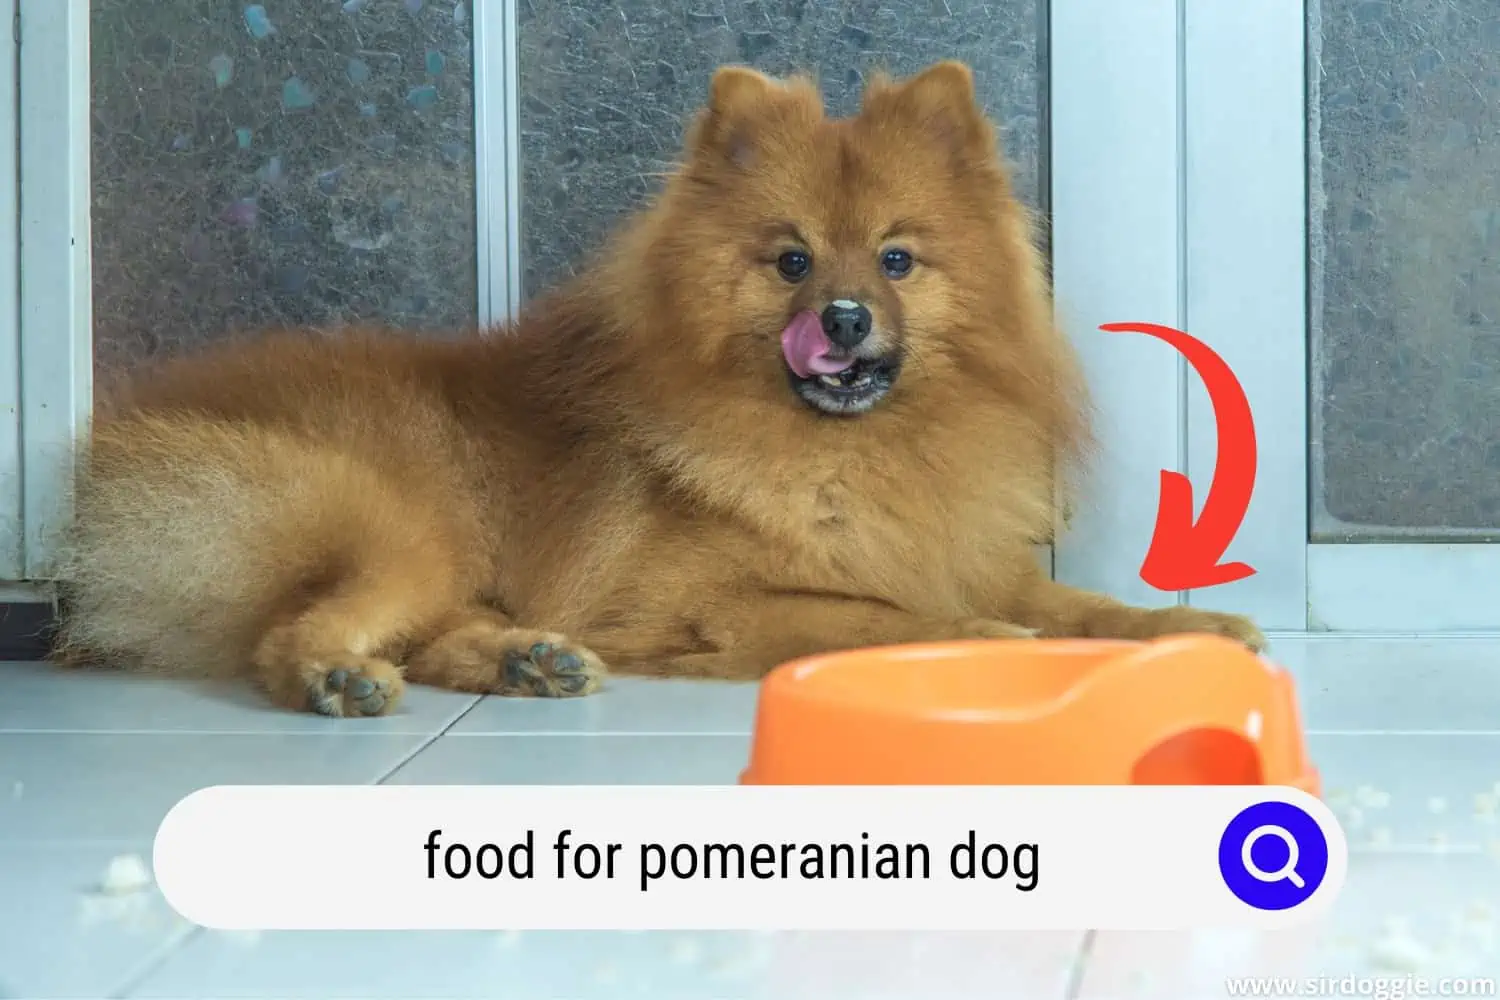 Pomeranian lying down while looking on food bowl